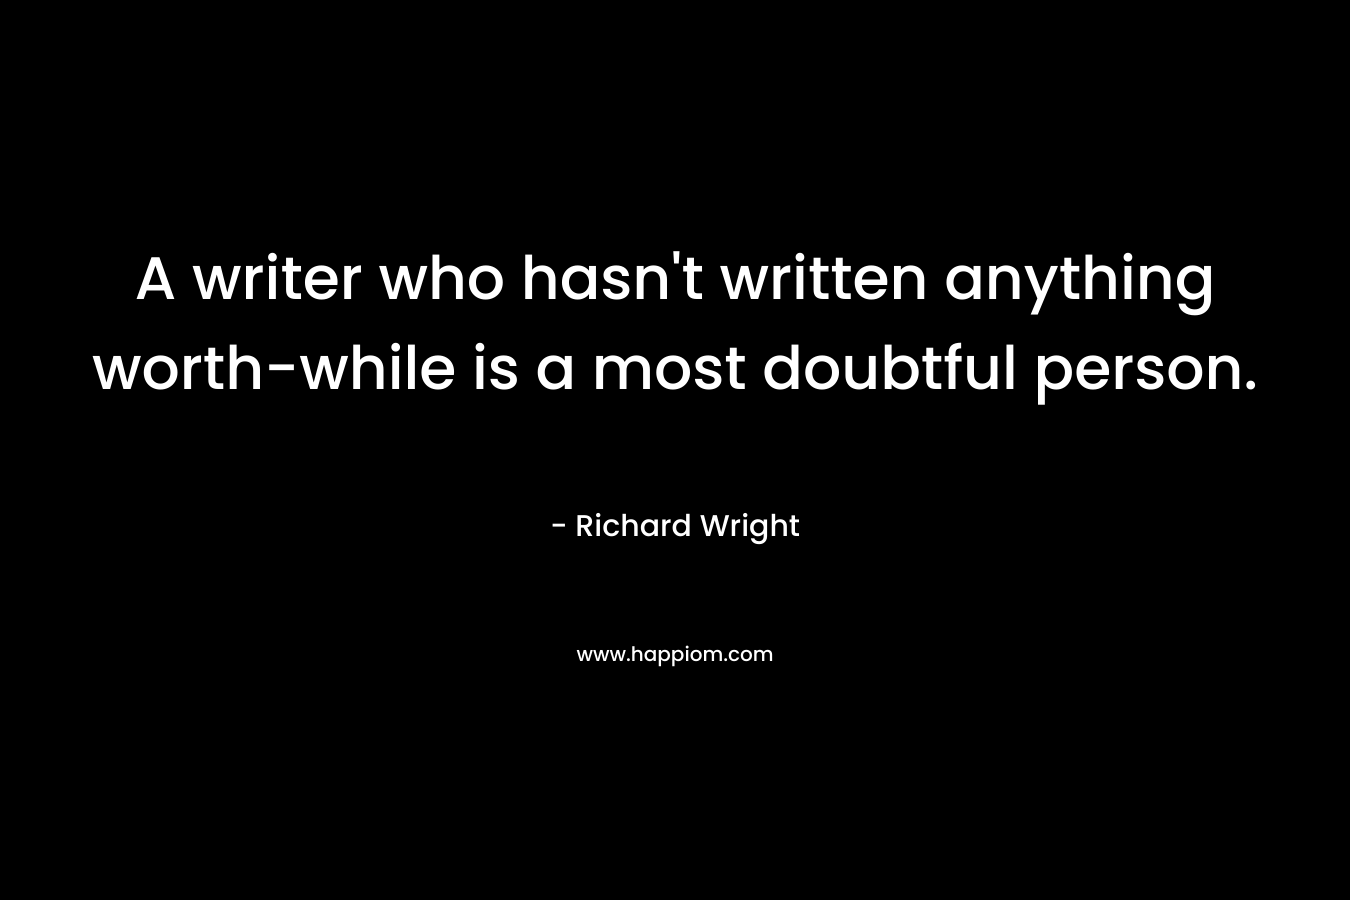 A writer who hasn’t written anything worth-while is a most doubtful person. – Richard Wright